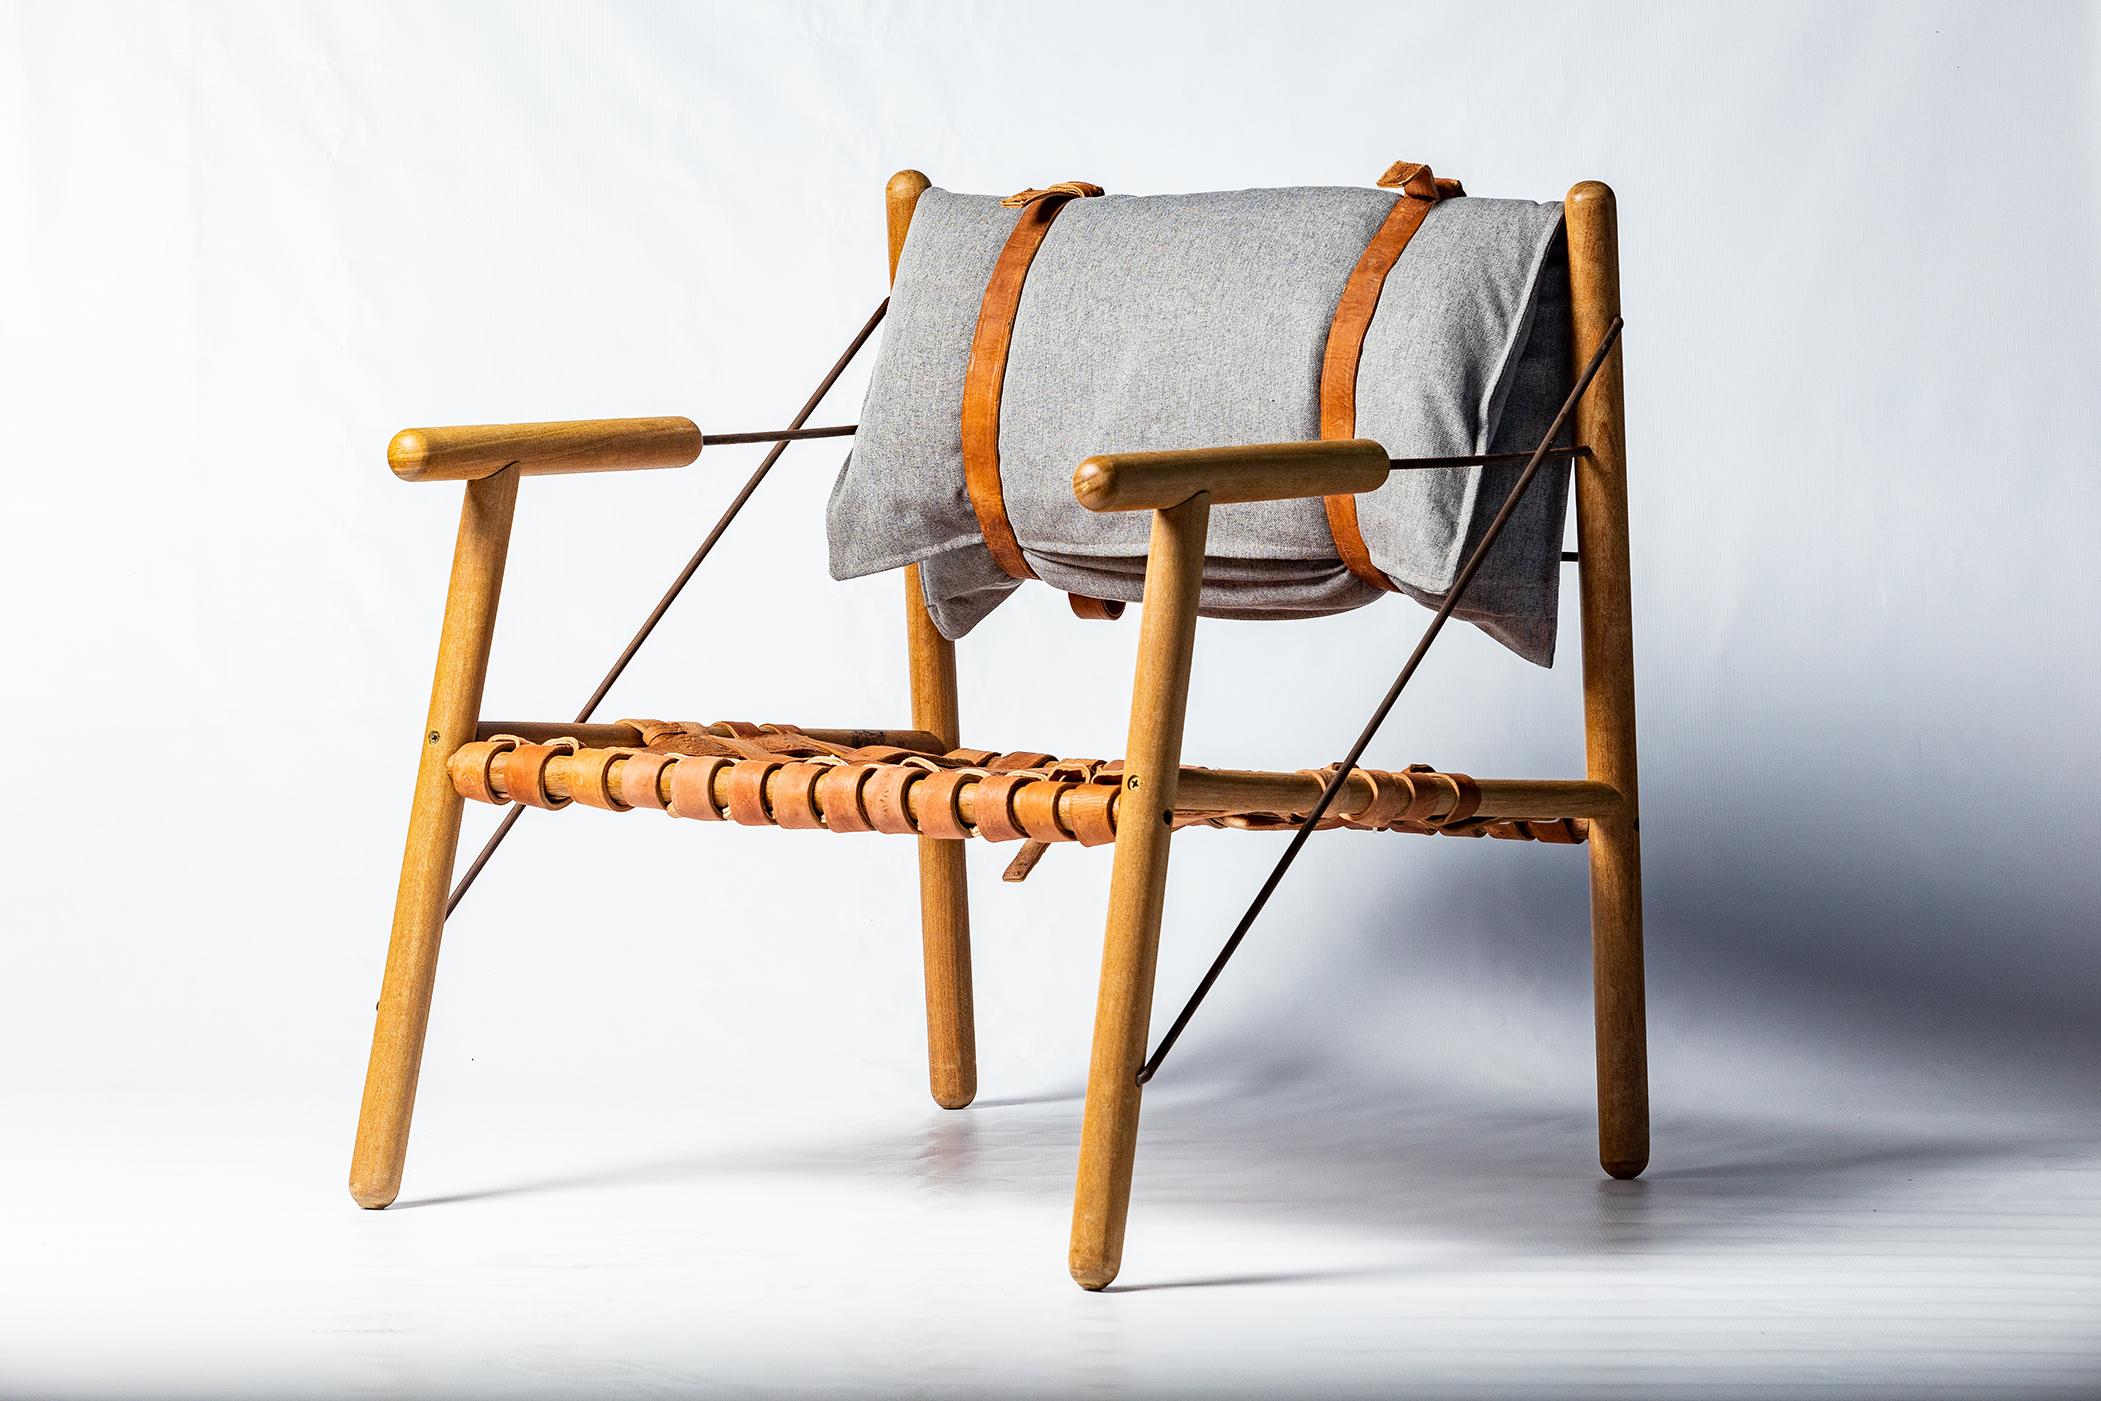 The Arreio Armchair is a unique piece, produced with pieces of leather found at free fairs in the hinterland of Alagoas. Its structure is made from leather horse harness, which gives it incomparable resistance and durability.
Cumaru wood is the